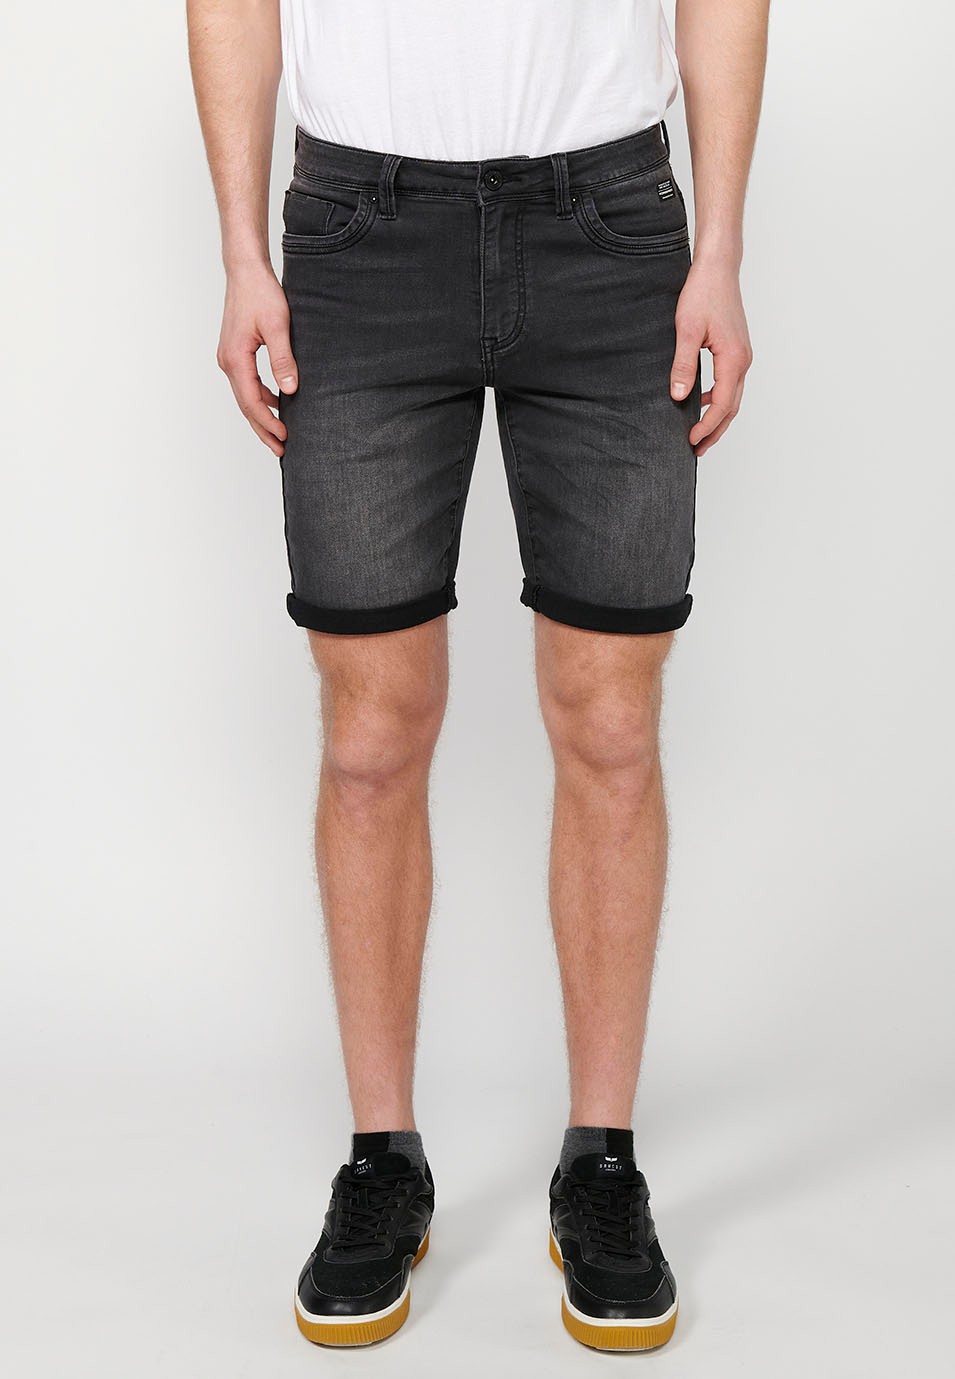 Shorts with turn-up finish with front closure with zipper and button in Black for Men 2